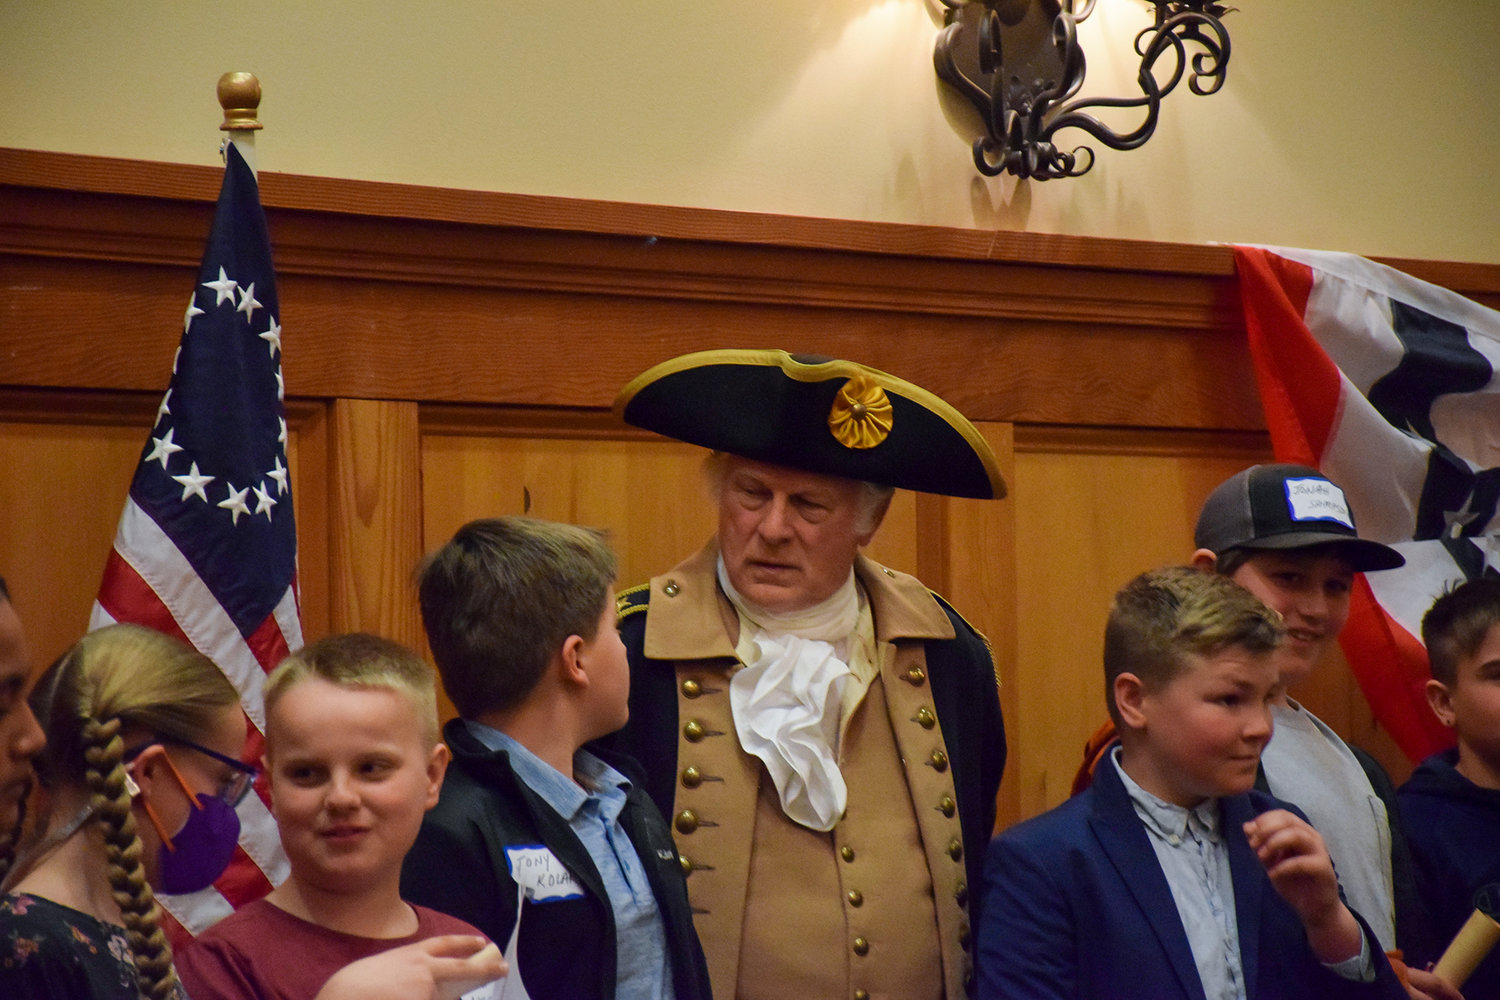 George Washington reenactor Vern Frykholm takes photos with Tukes Valley Middle School students during the Sons of the American Revolution convention at the Heathman Lodge on April 9.